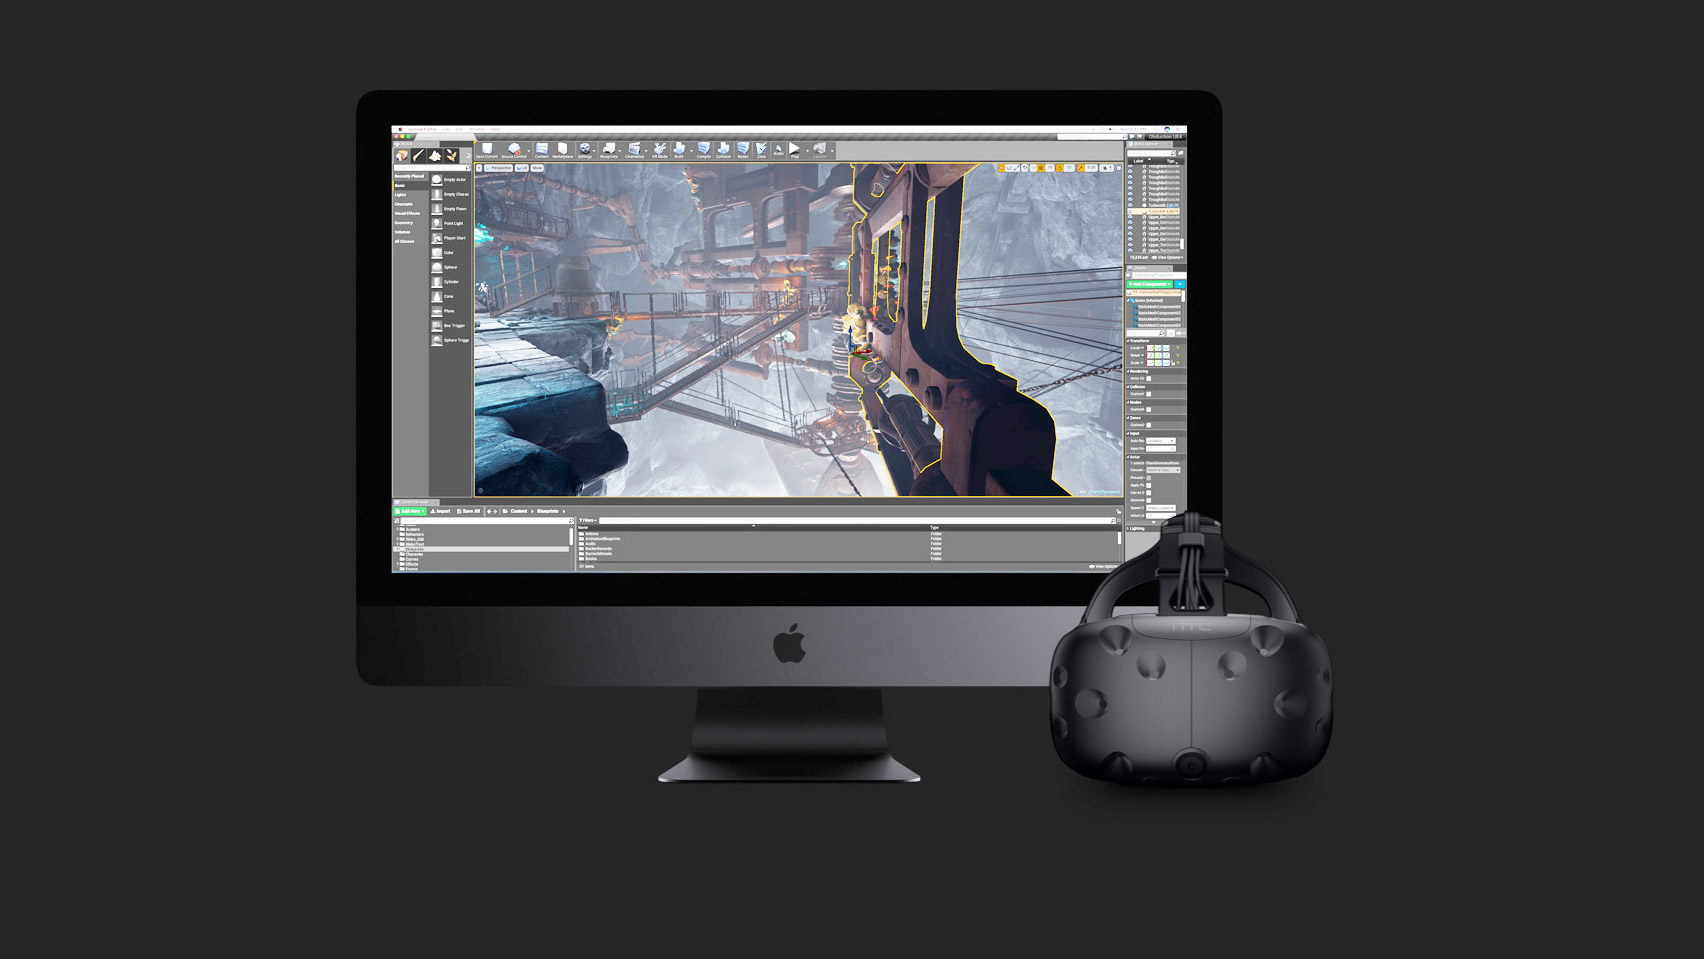 macOS Mojave will bring plug and play support to HTC Vive Pro virtual reality device